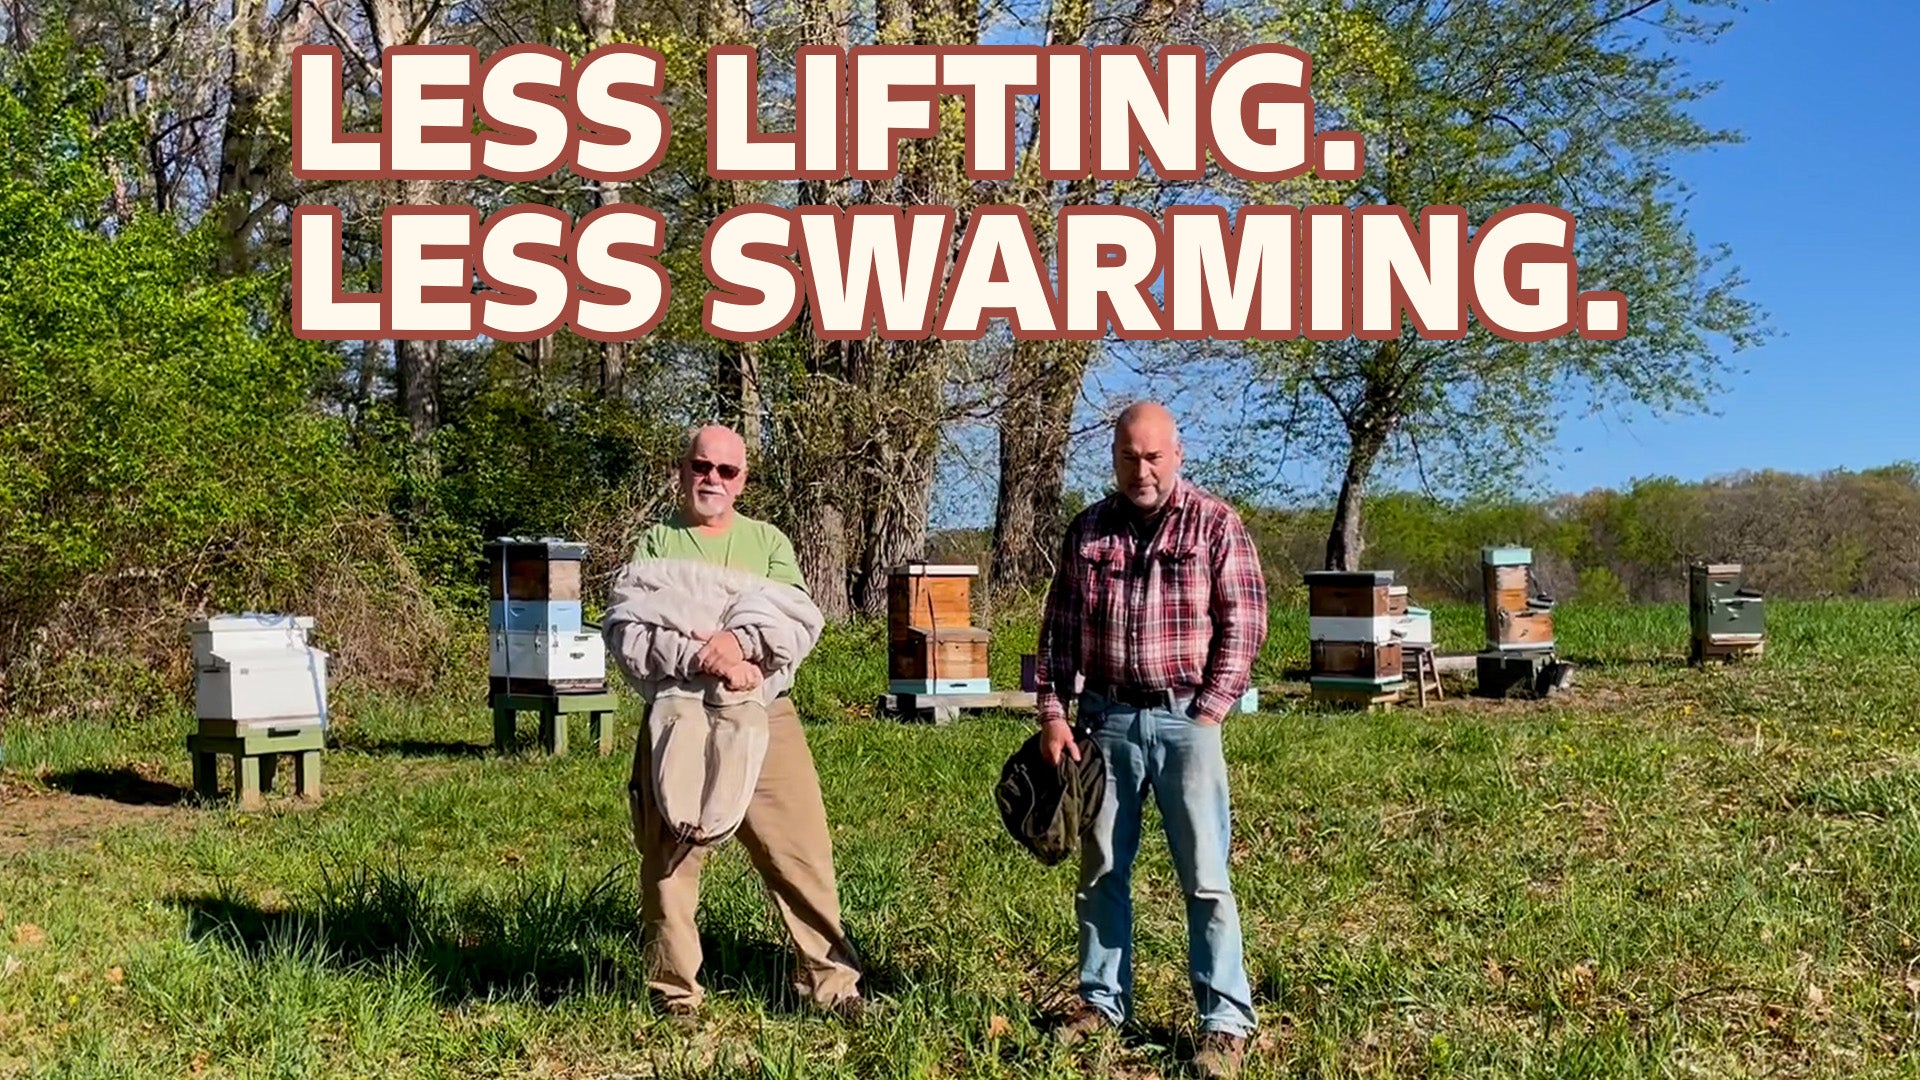 Load video: how to perform the Demaree method for swarm control swarming prevention beekeeping beginner hive